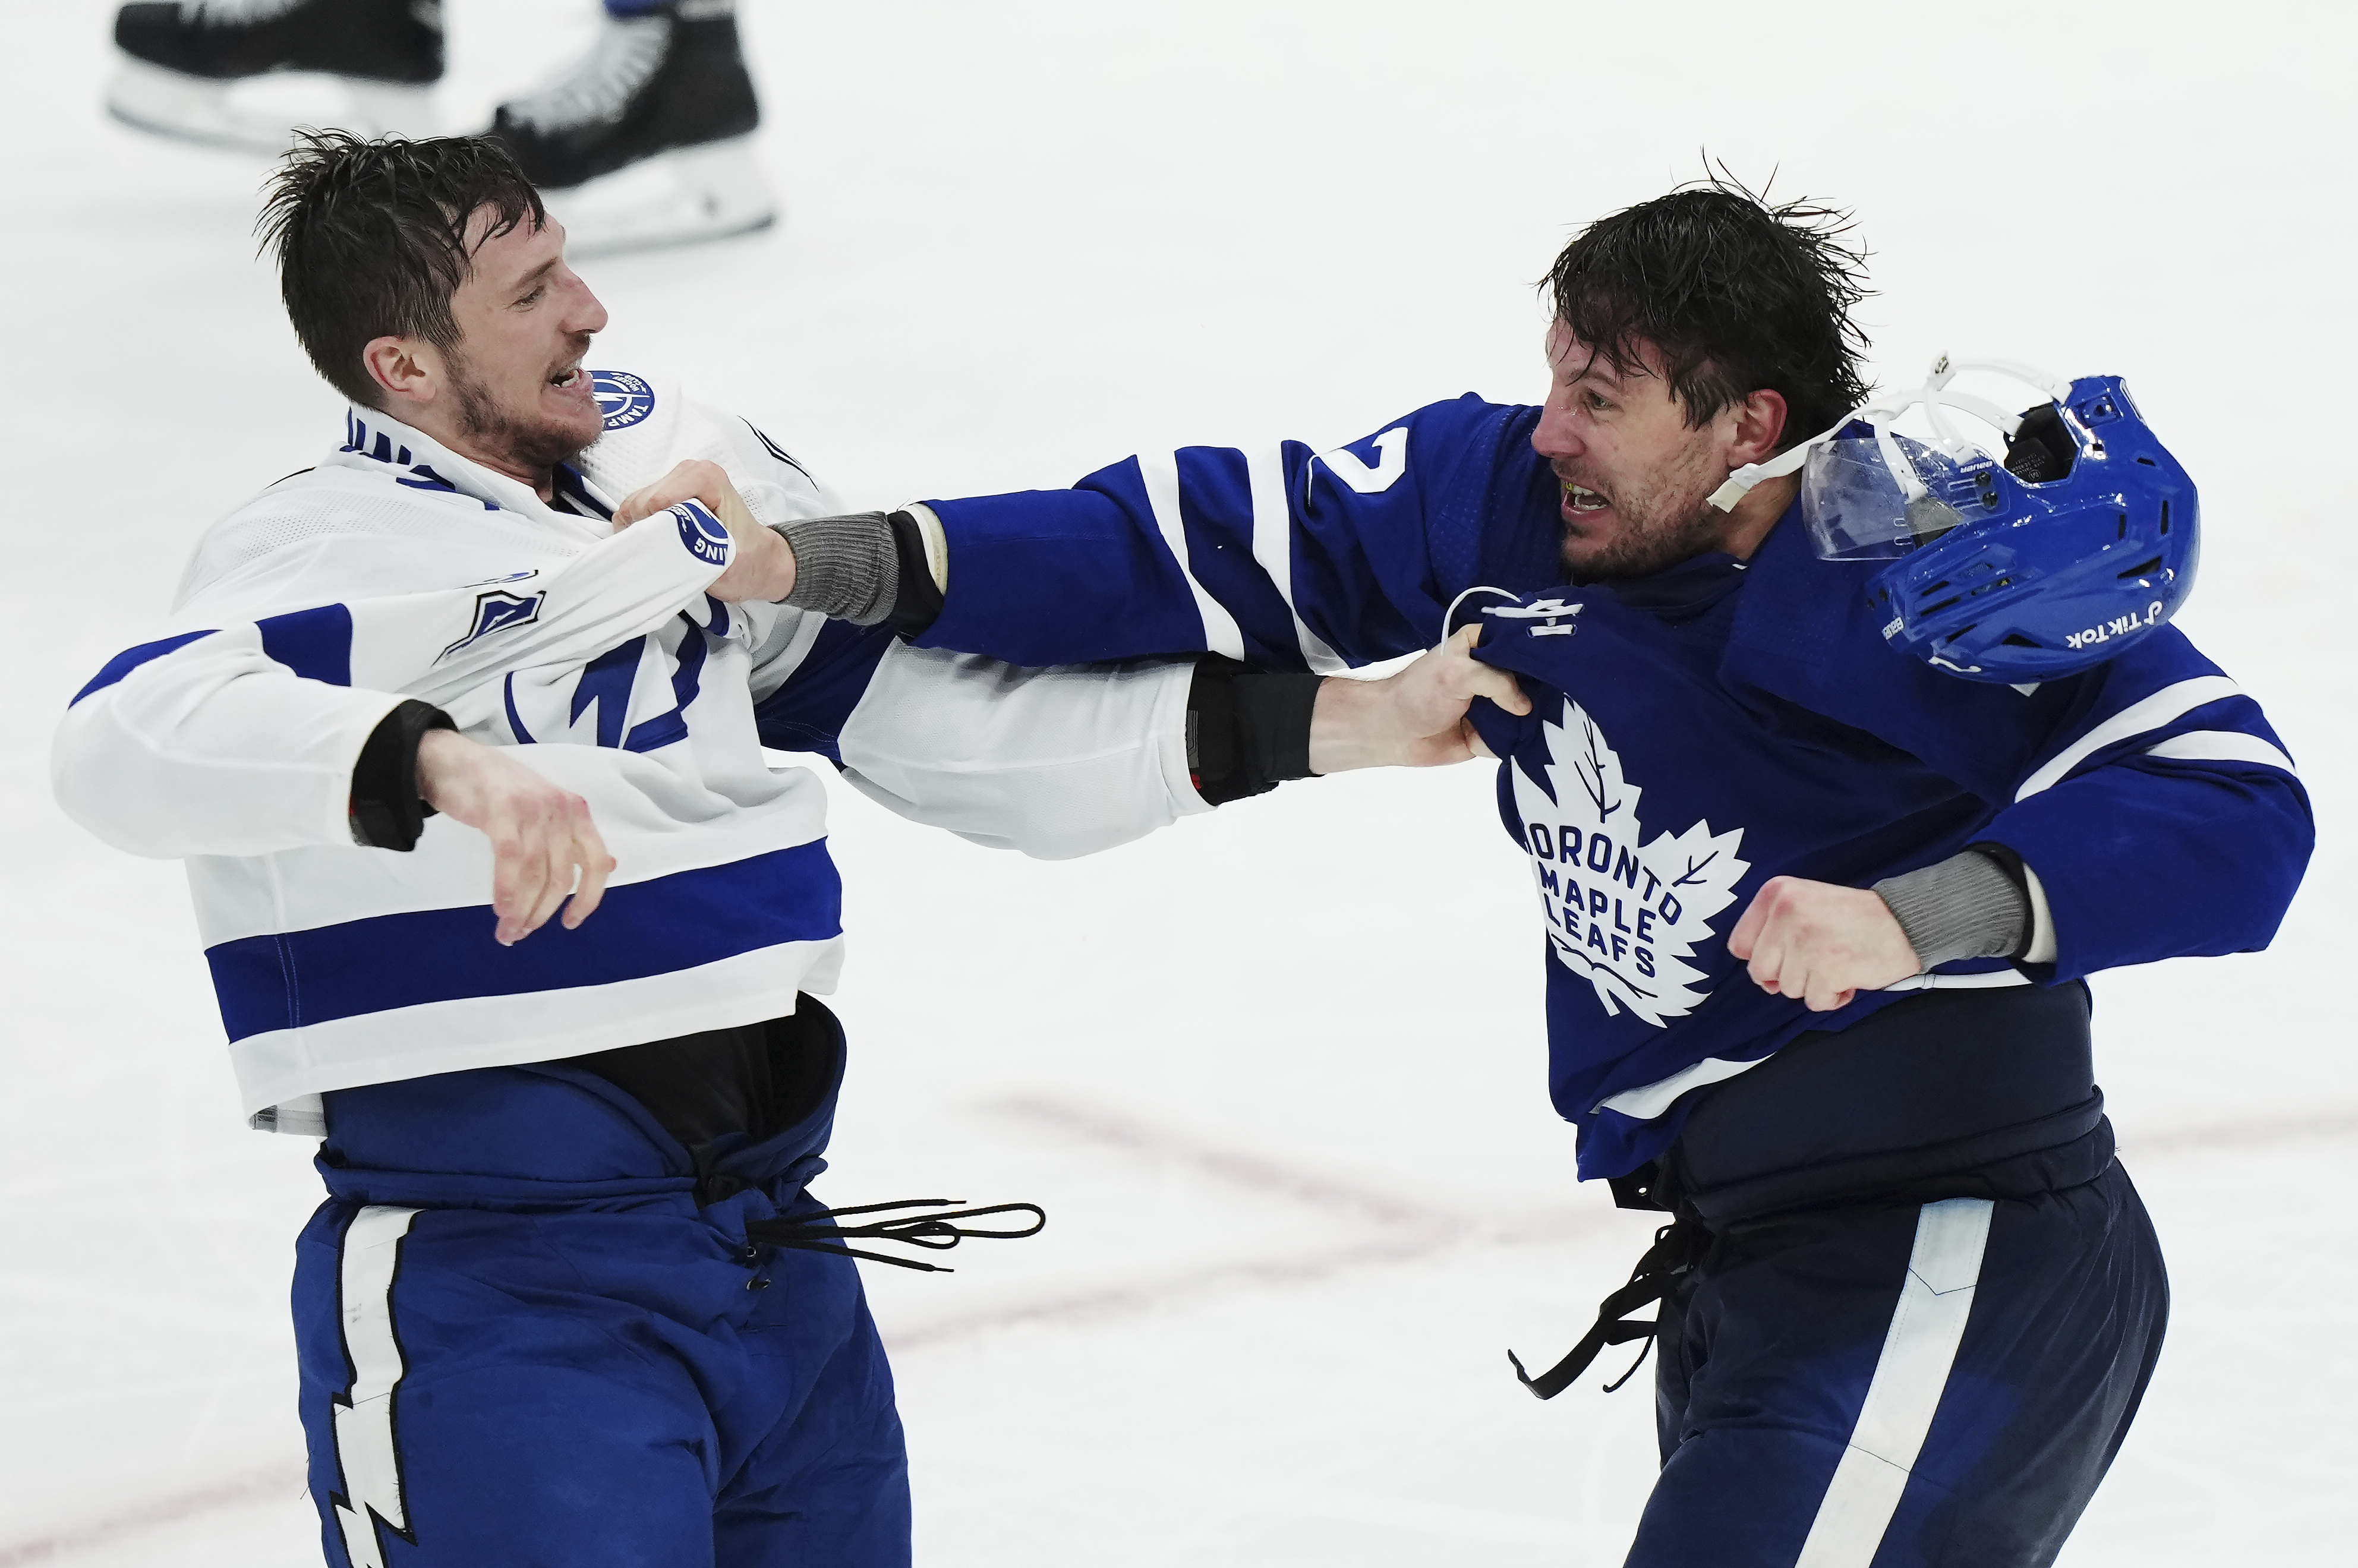 Toronto Maple Leafs on X: It's time to update your @MapleLeafs